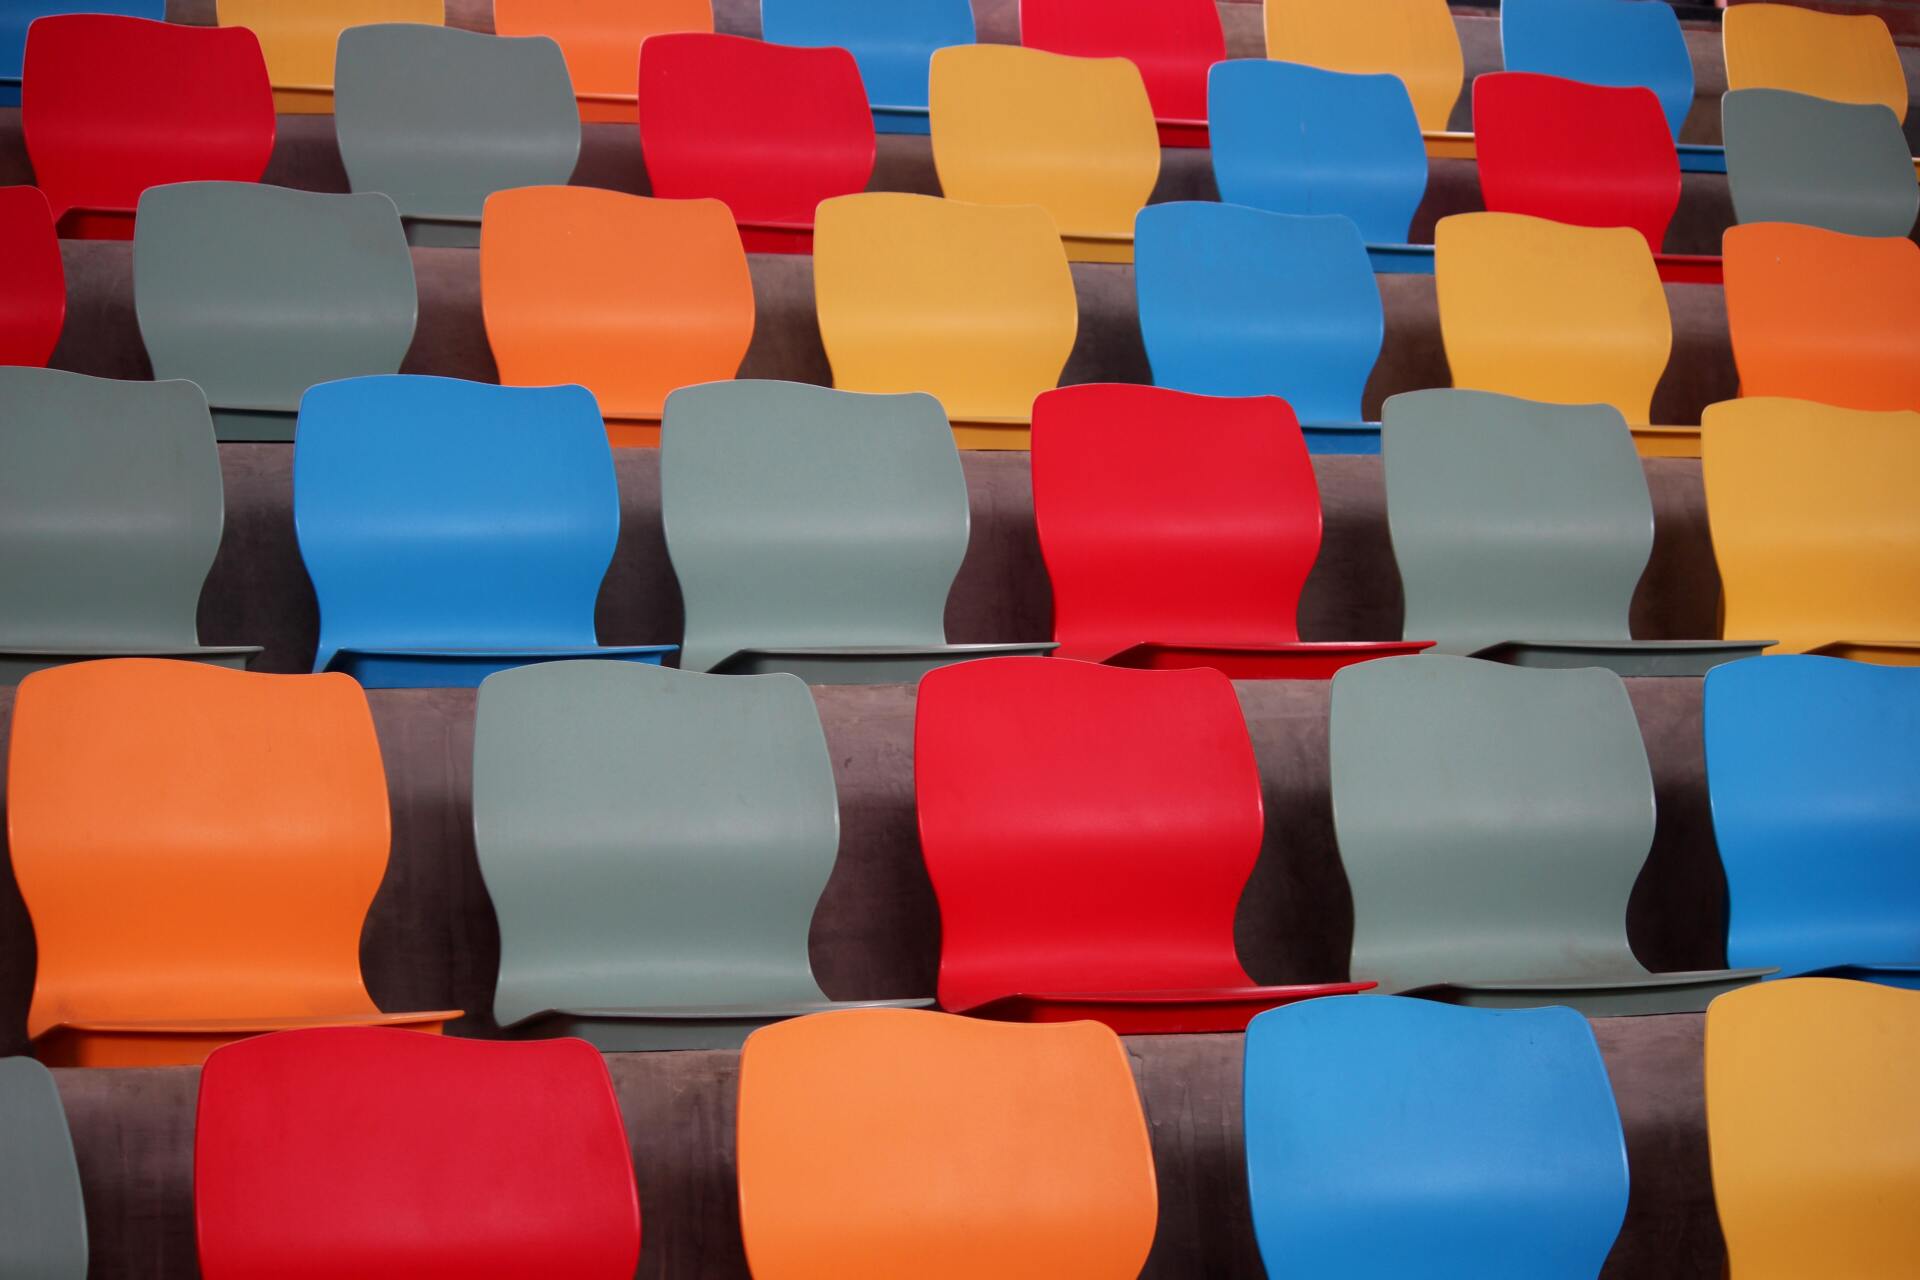 Repeating rows of colored audience chairs